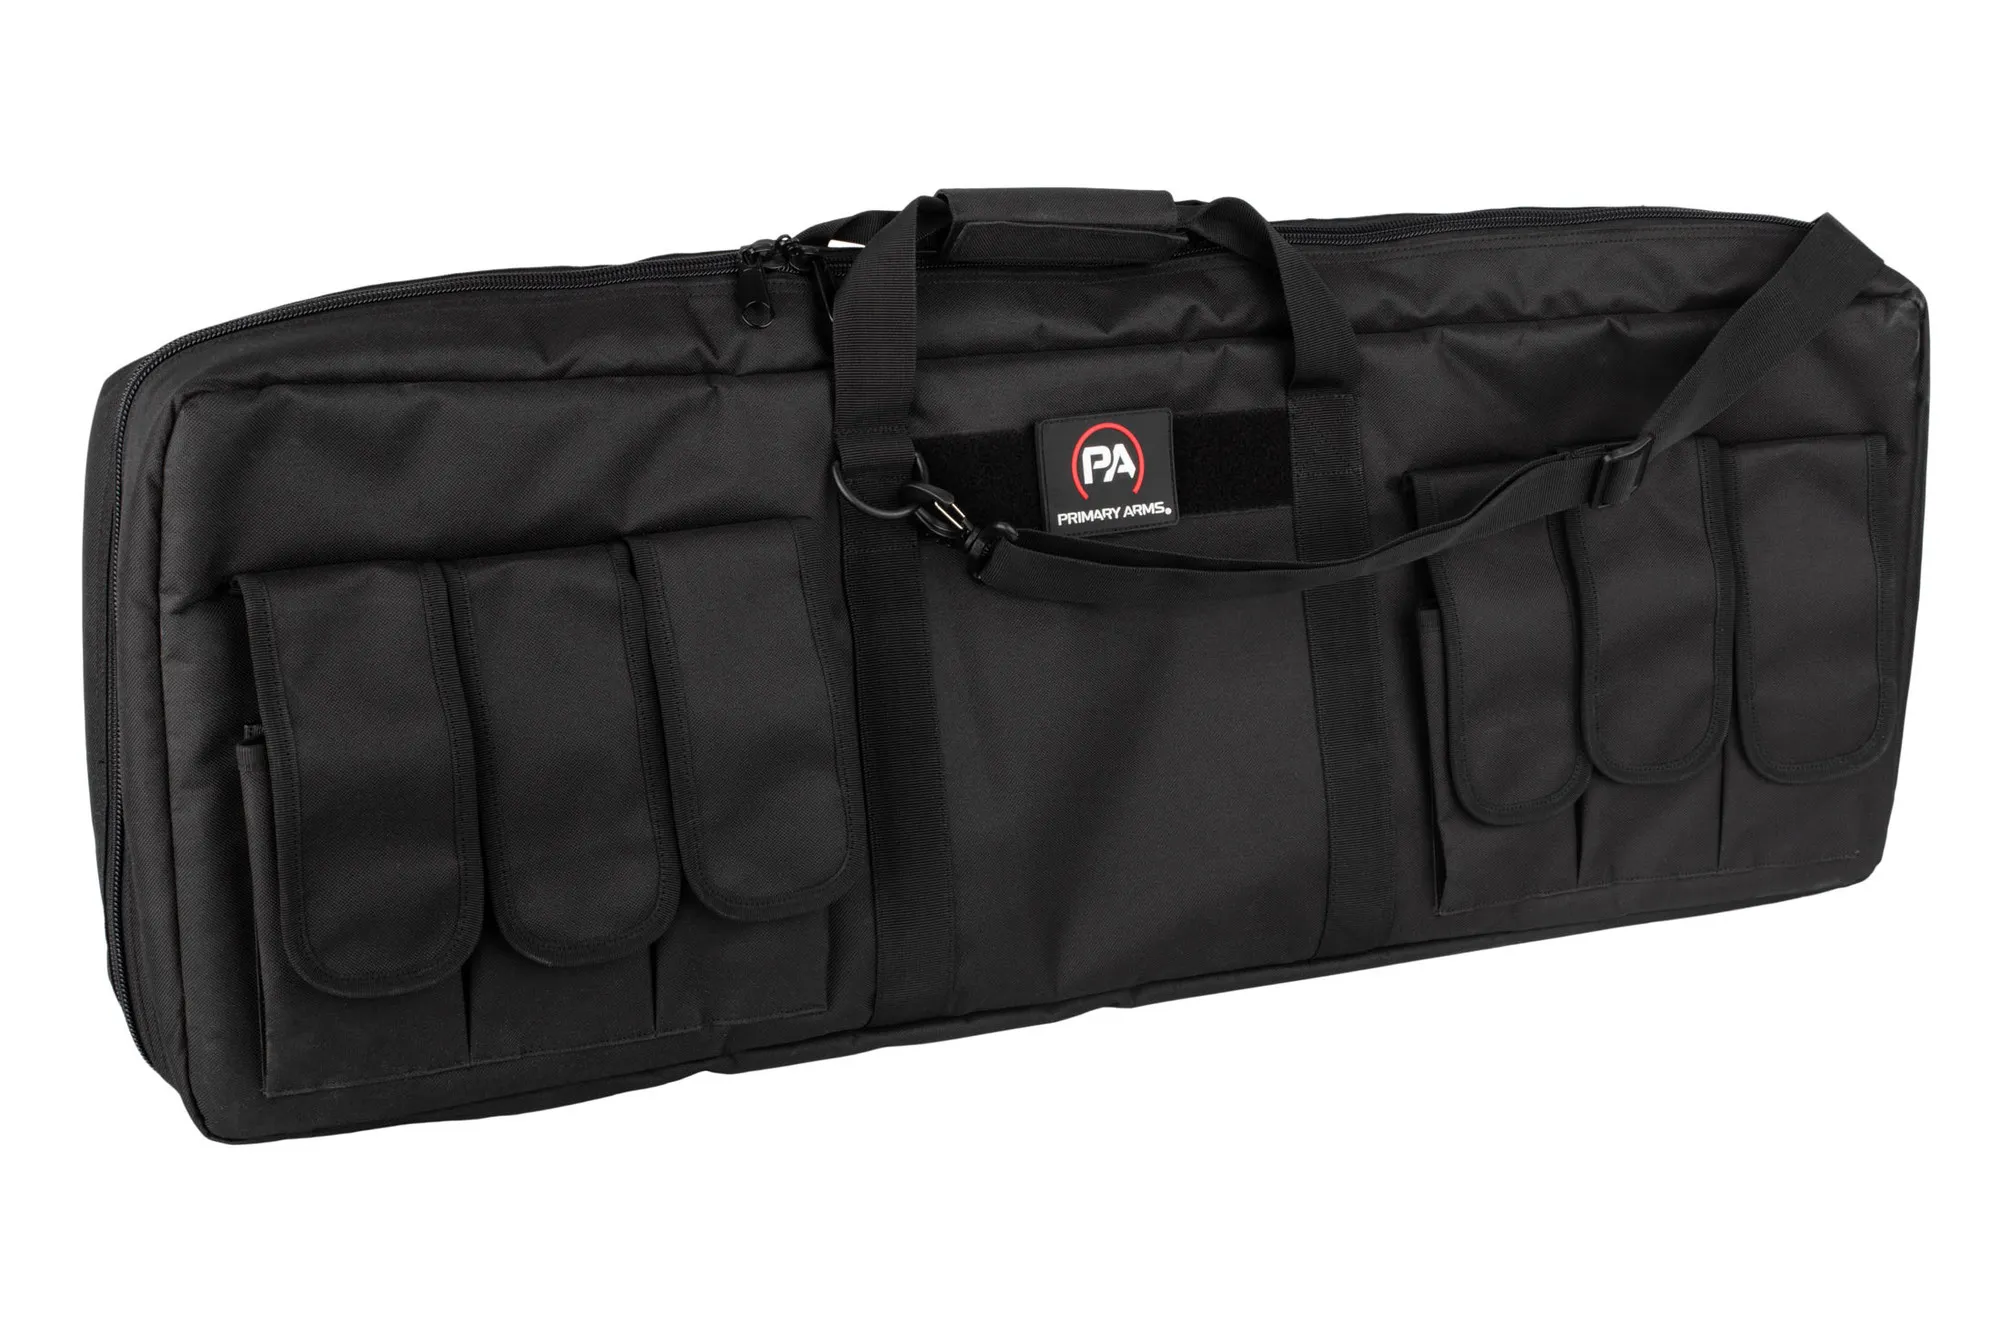 Primary Arms AR-15 Rifle Case